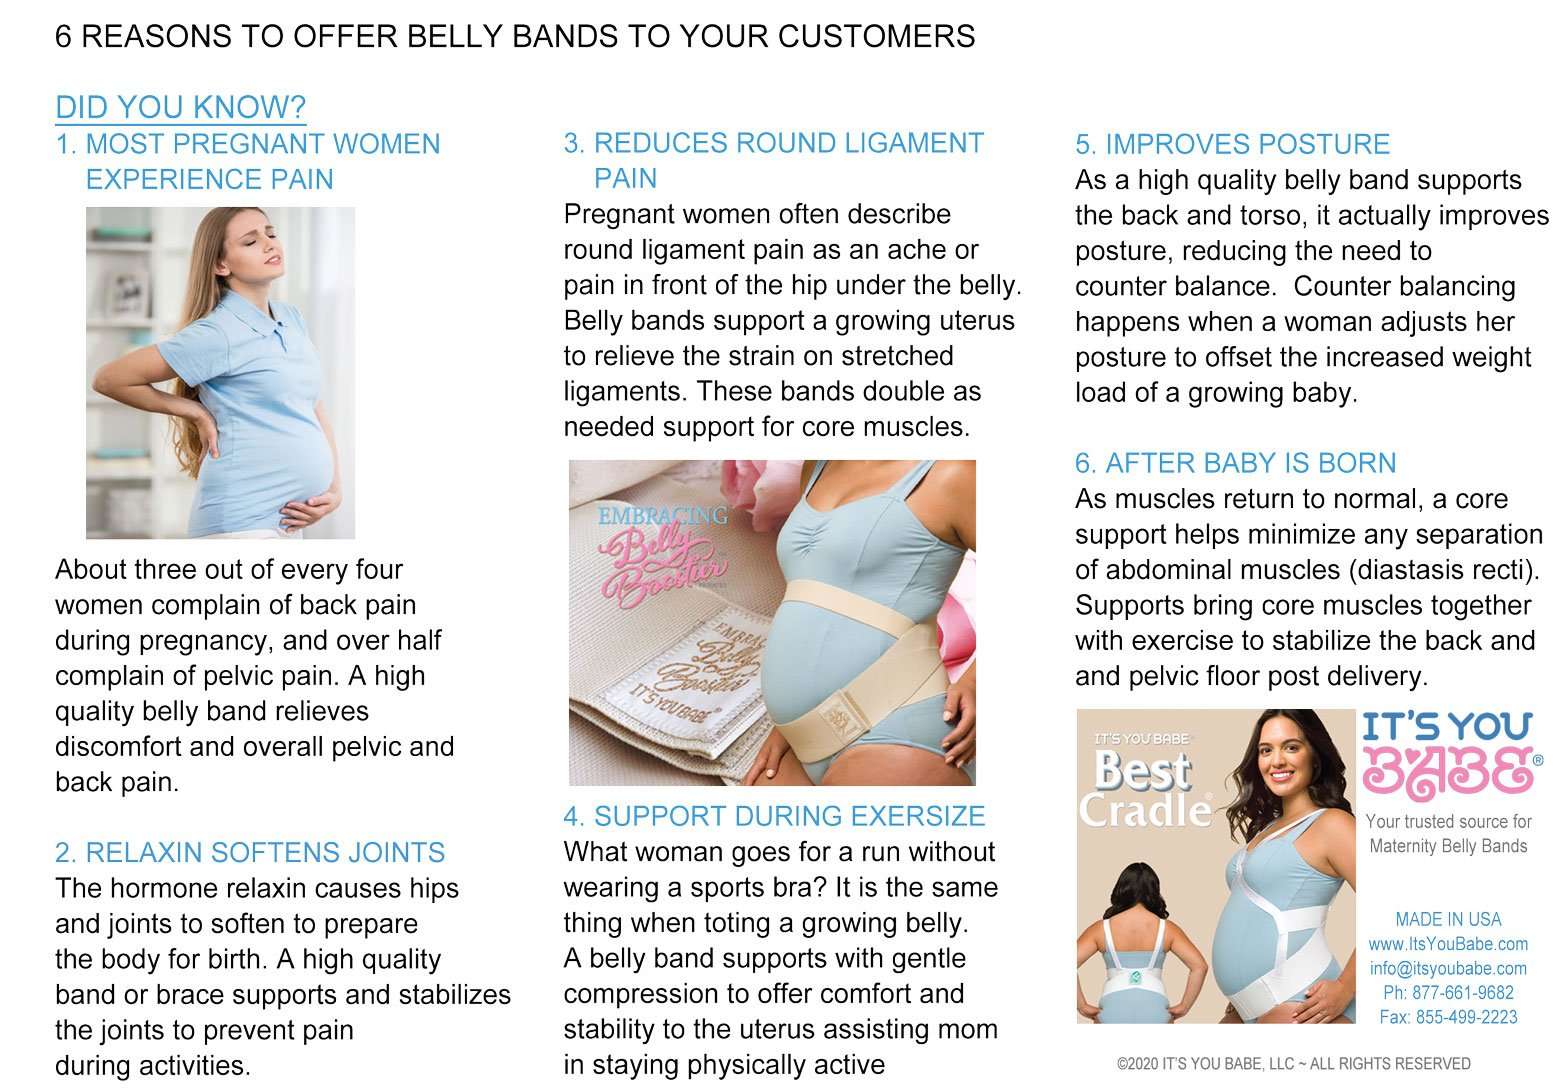 The Belly Band: What's it all about? - Yummy Maternity